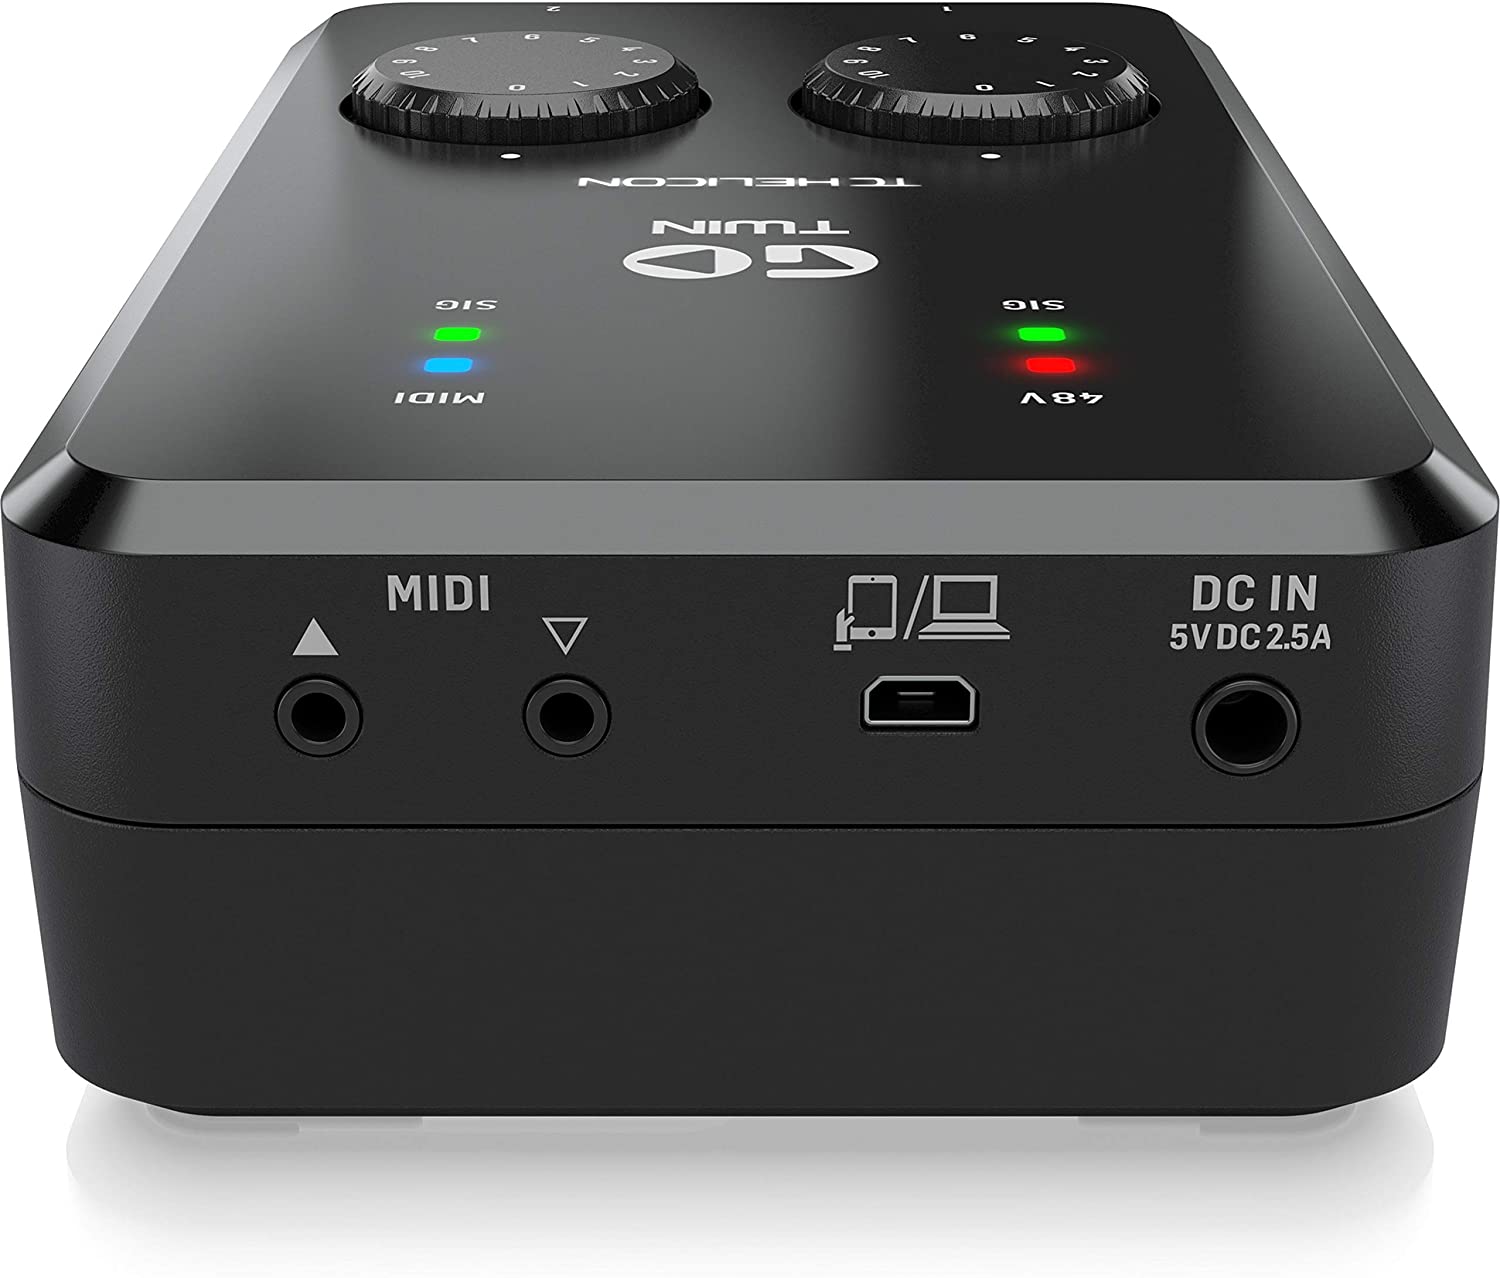 TC-Helicon TC Helicon GO TWIN High-Definition 2-Channel Audio/MIDI Interface for Mobile Devices - Golchha Computers